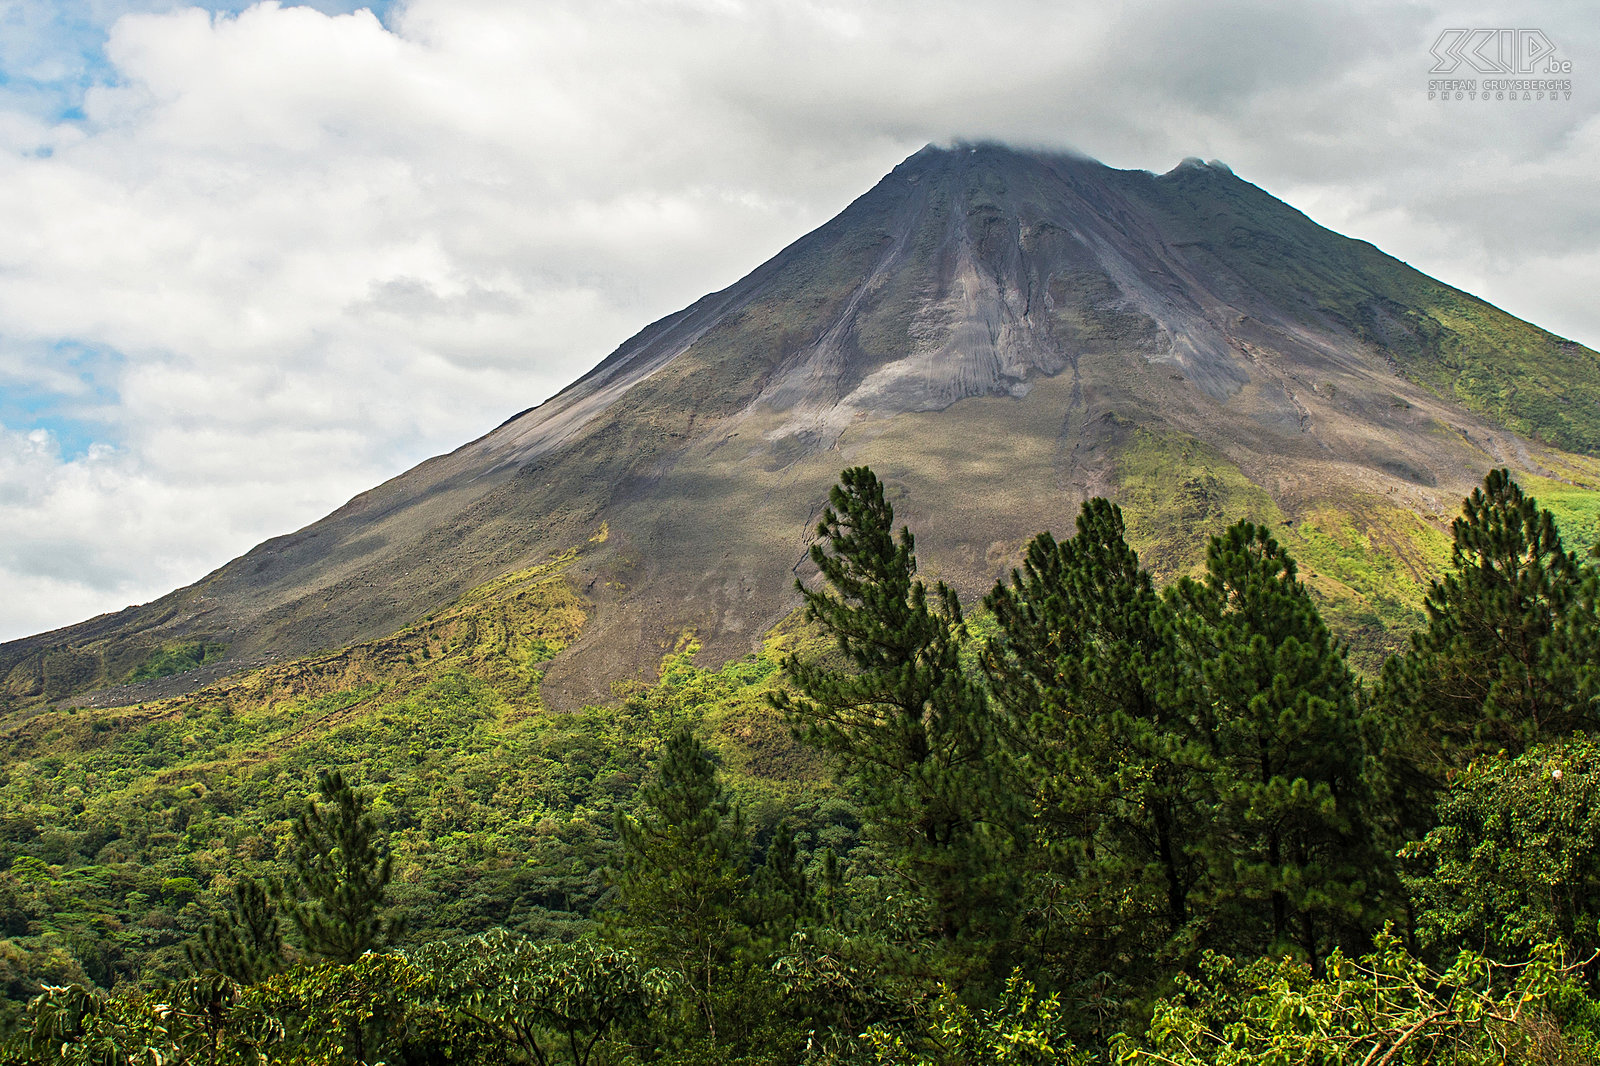 Arenal volcano The Arenal volcano is conically shaped with a crater and is 1633 meters high. It is an active volcano but since 2010 volcanic activity appears to be decreasing and explosions have become rare. In 1968 it erupted unexpectedly, destroying the small town of Tabacón. <br />
 Stefan Cruysberghs